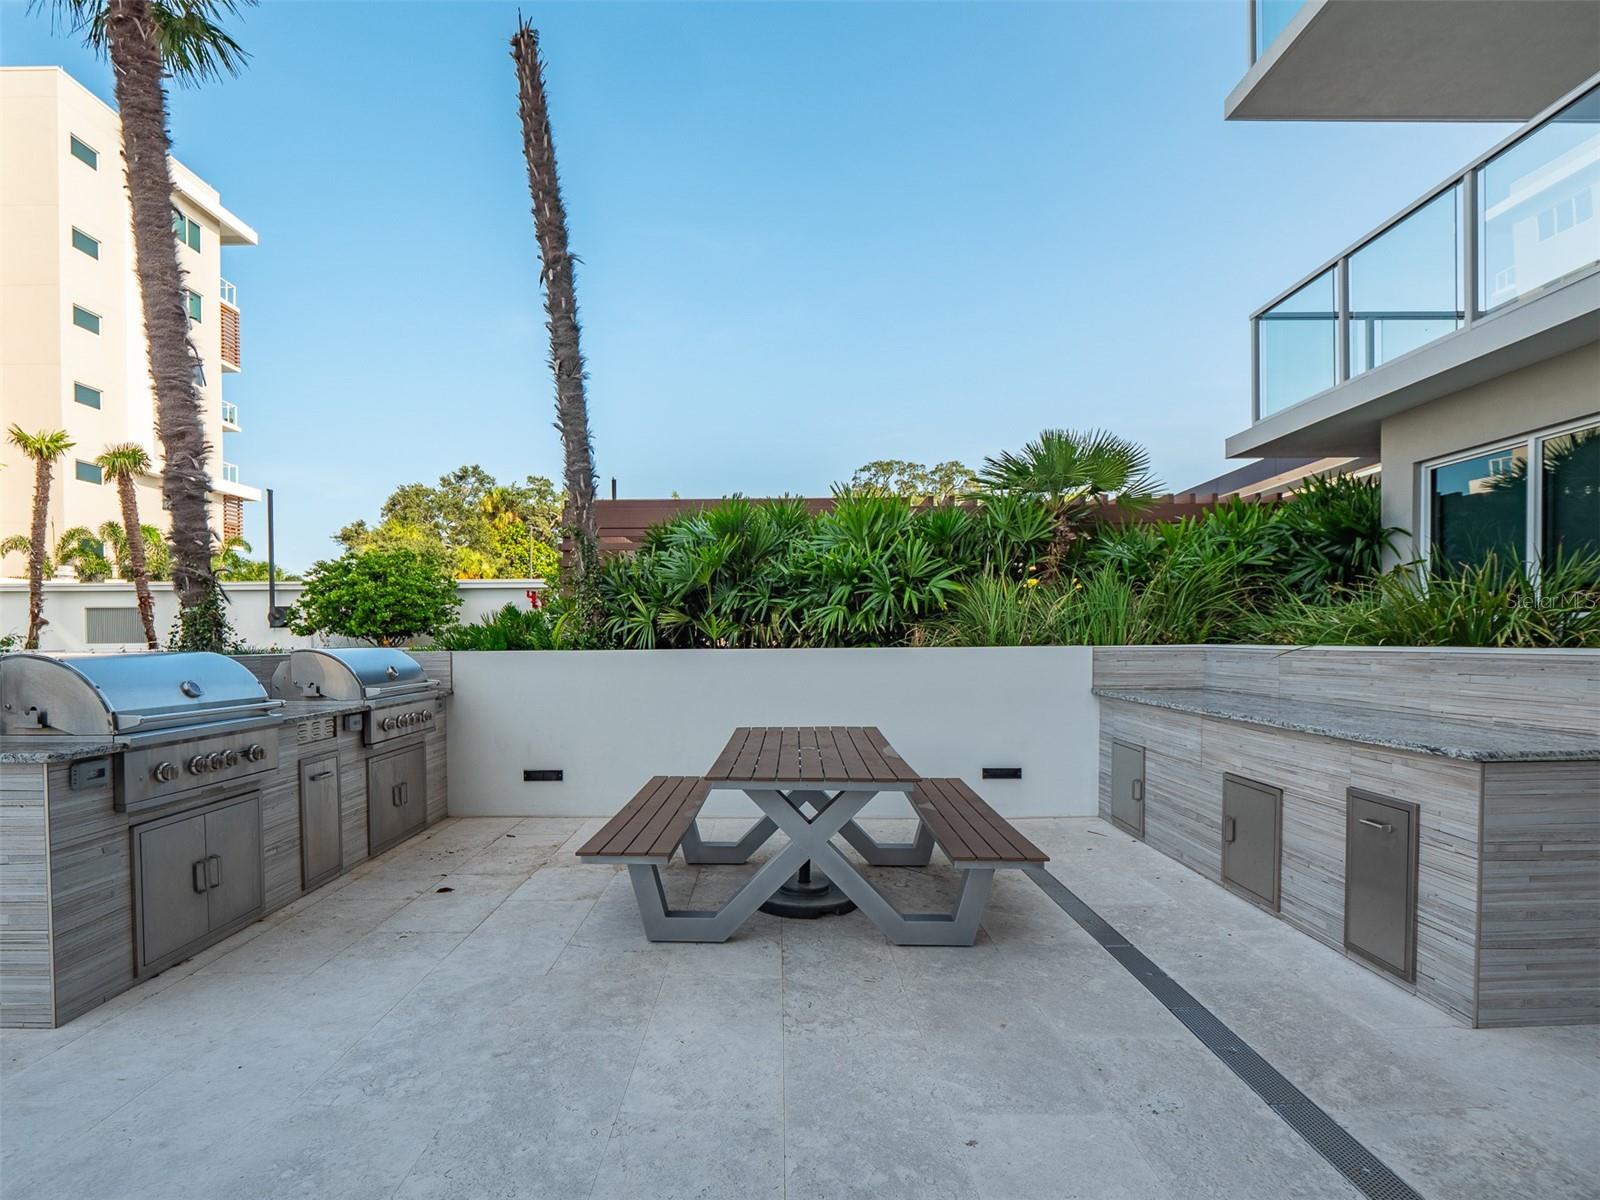 Outdoor grilling and dining area by the pool